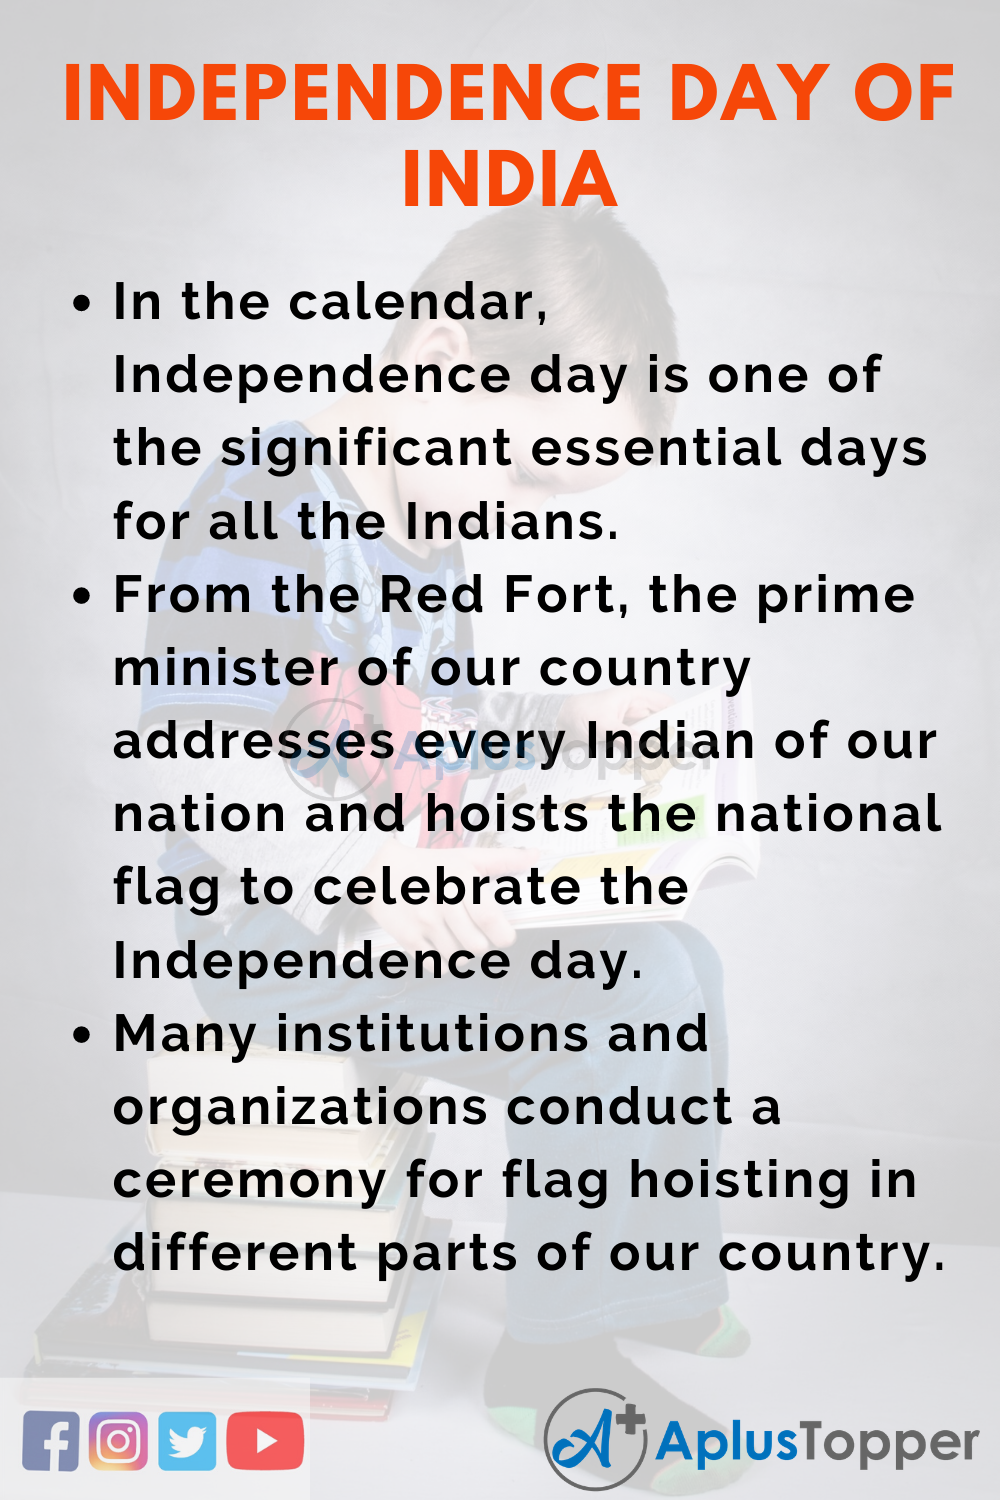 10 Lines On Independence Day Of India for Higher Class Students